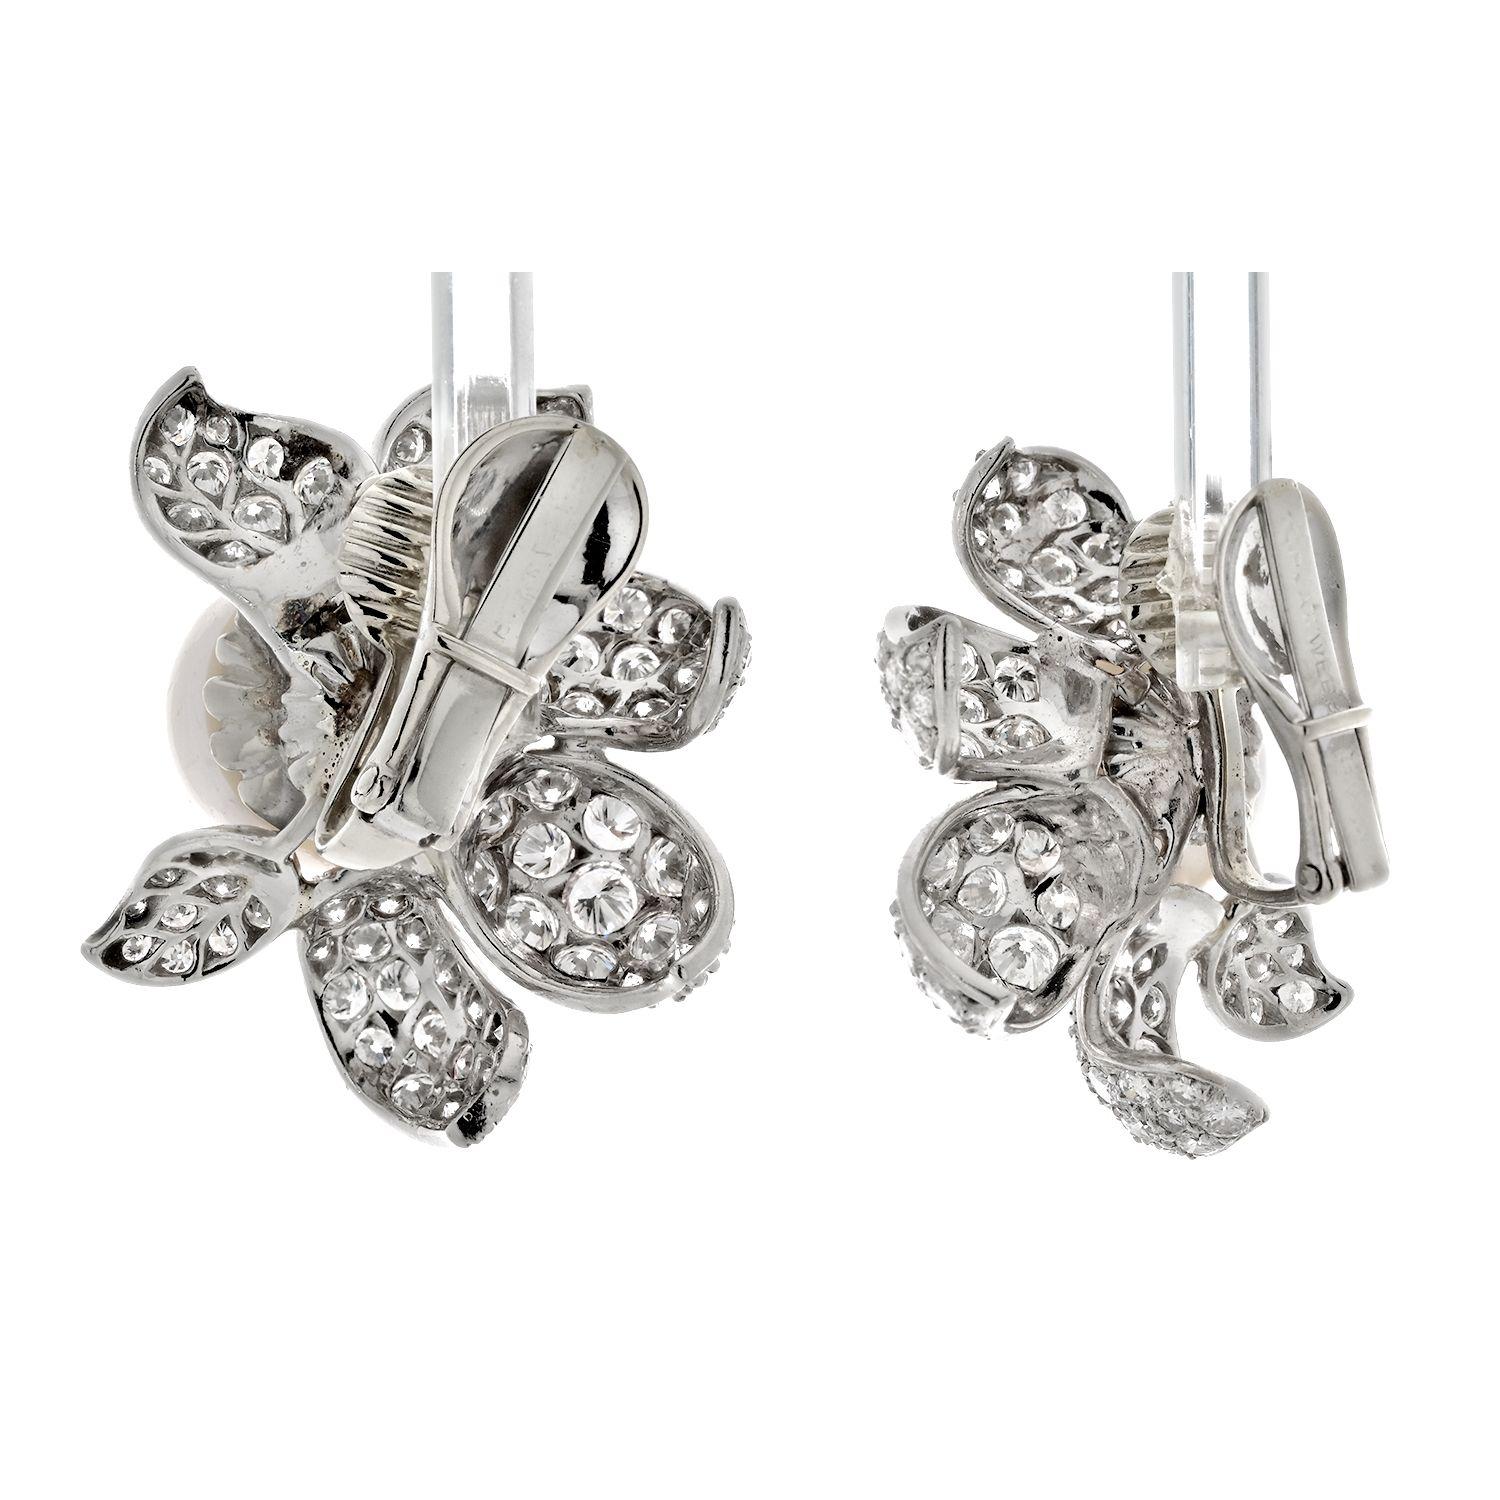 David Webb Platinum Diamond And White Pearl Flower Clip Earrings In Excellent Condition For Sale In New York, NY